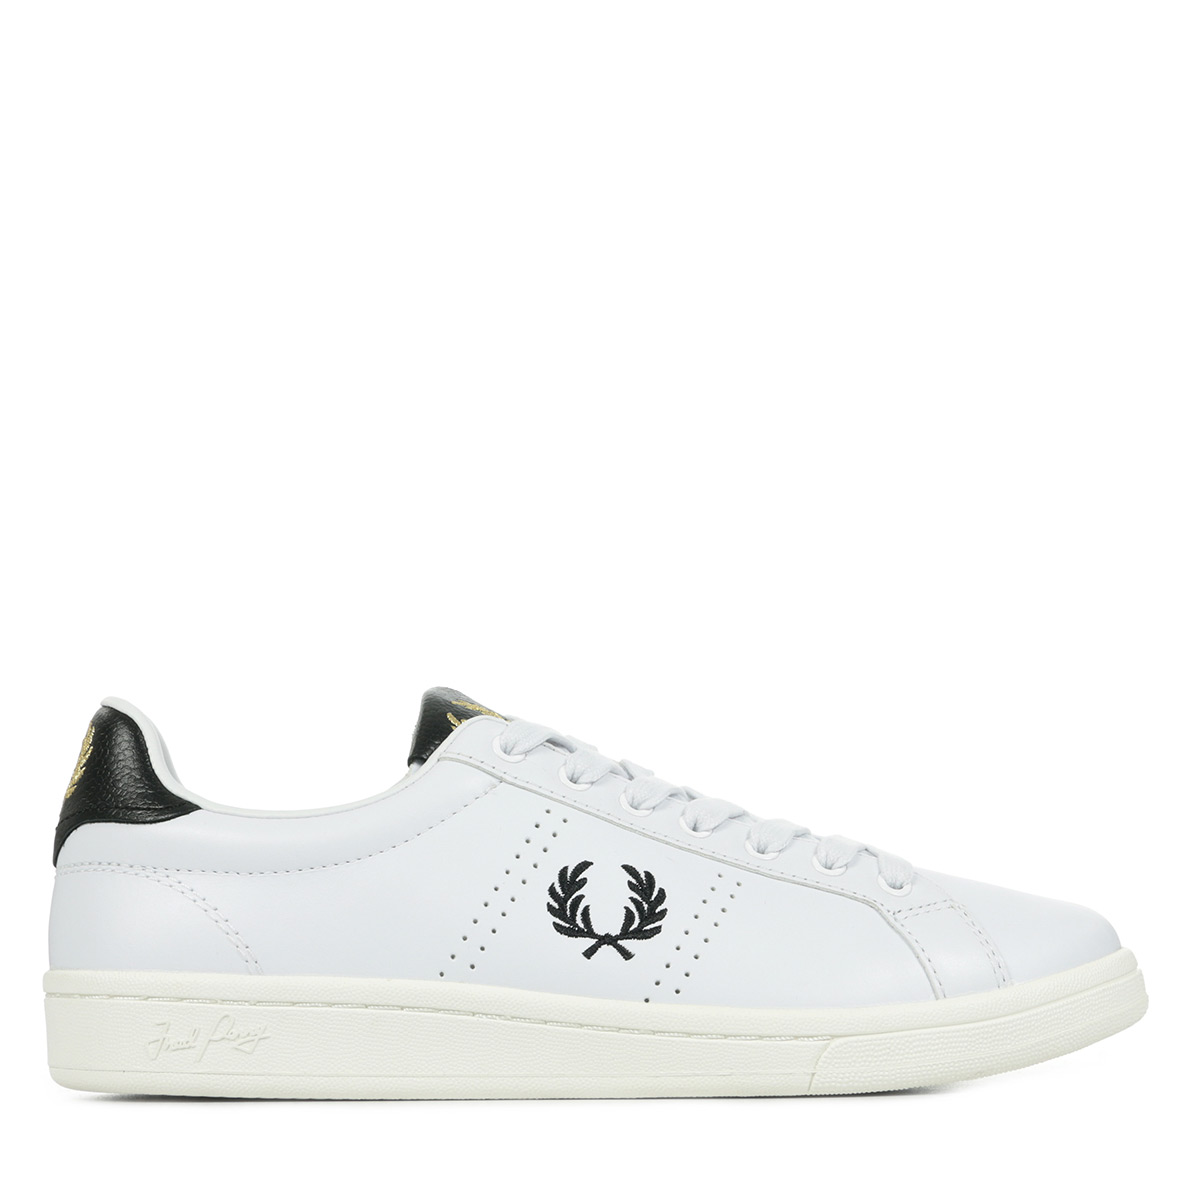 Fred Perry B721 Pique Embossed Leather Branded